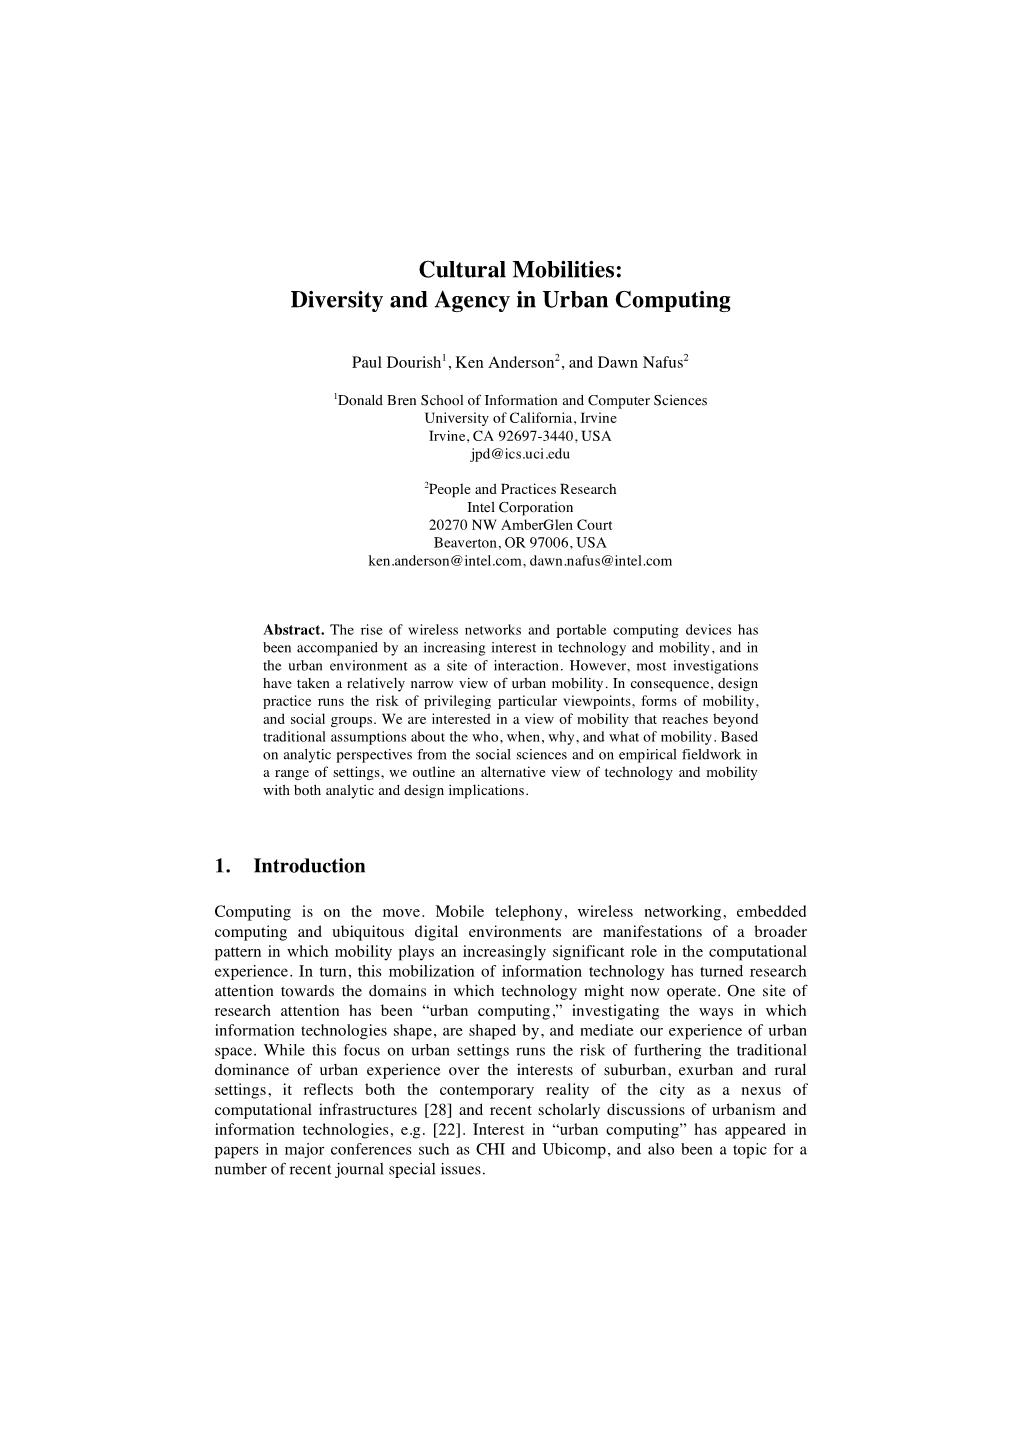 Cultural Mobilities: Diversity and Agency in Urban Computing